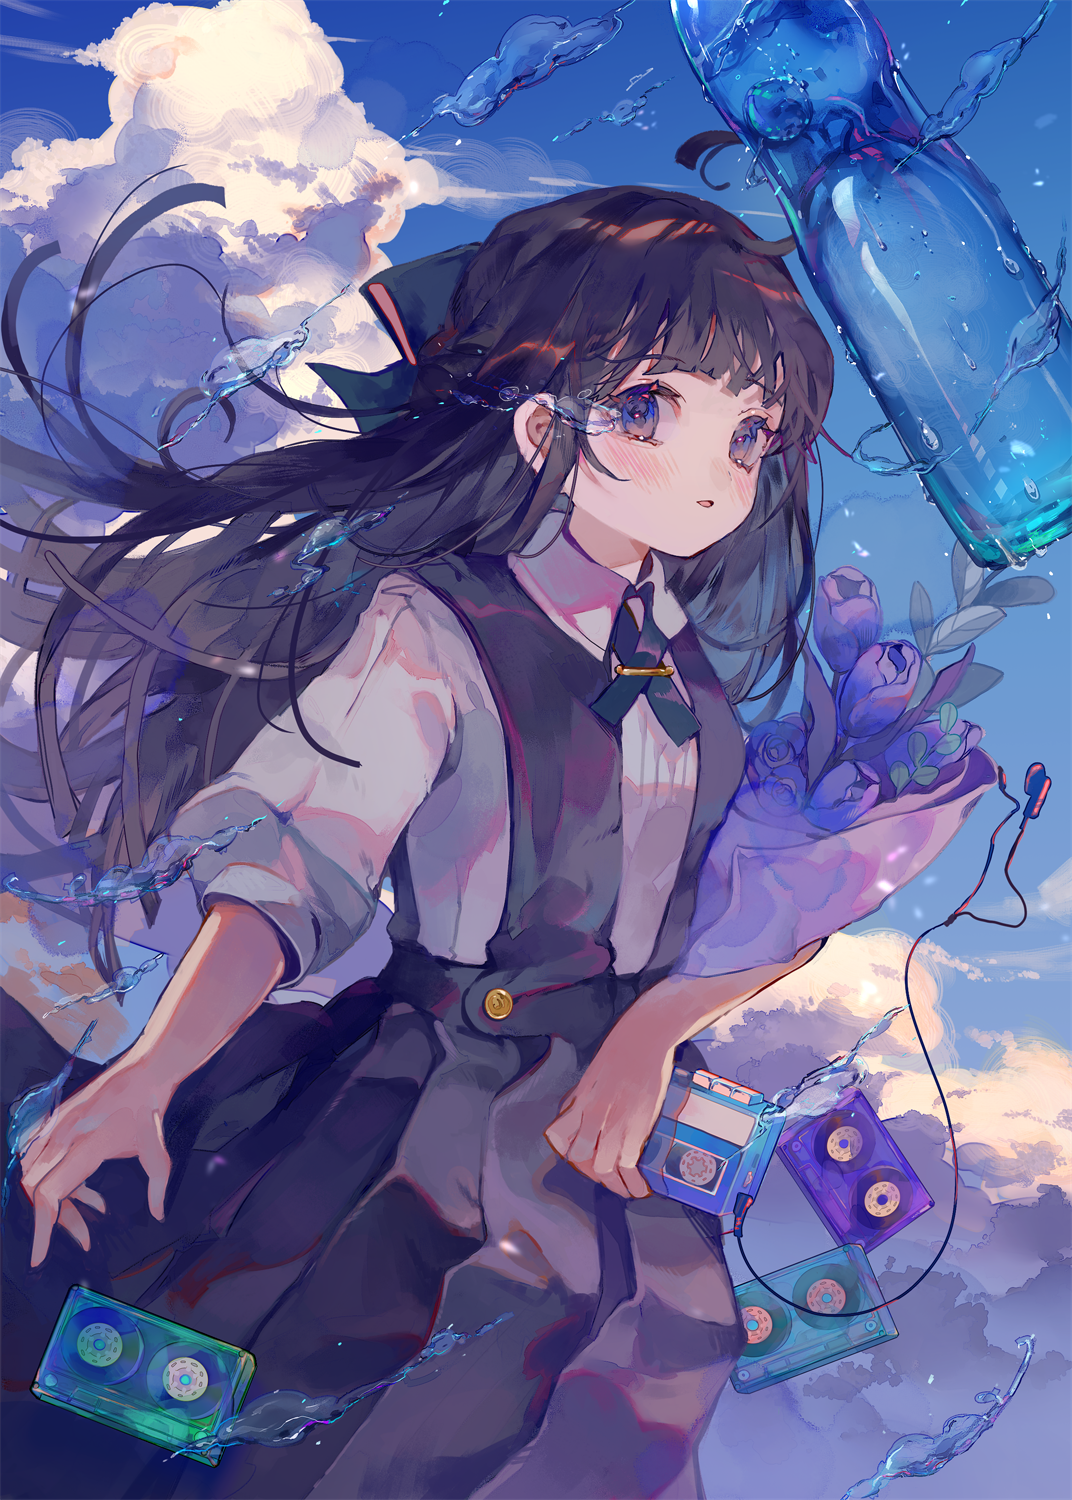 Pixiv Anime Anime Girls Portrait Display Blushing Cassette Sky Clouds Water Uniform Flowers Looking  1072x1500